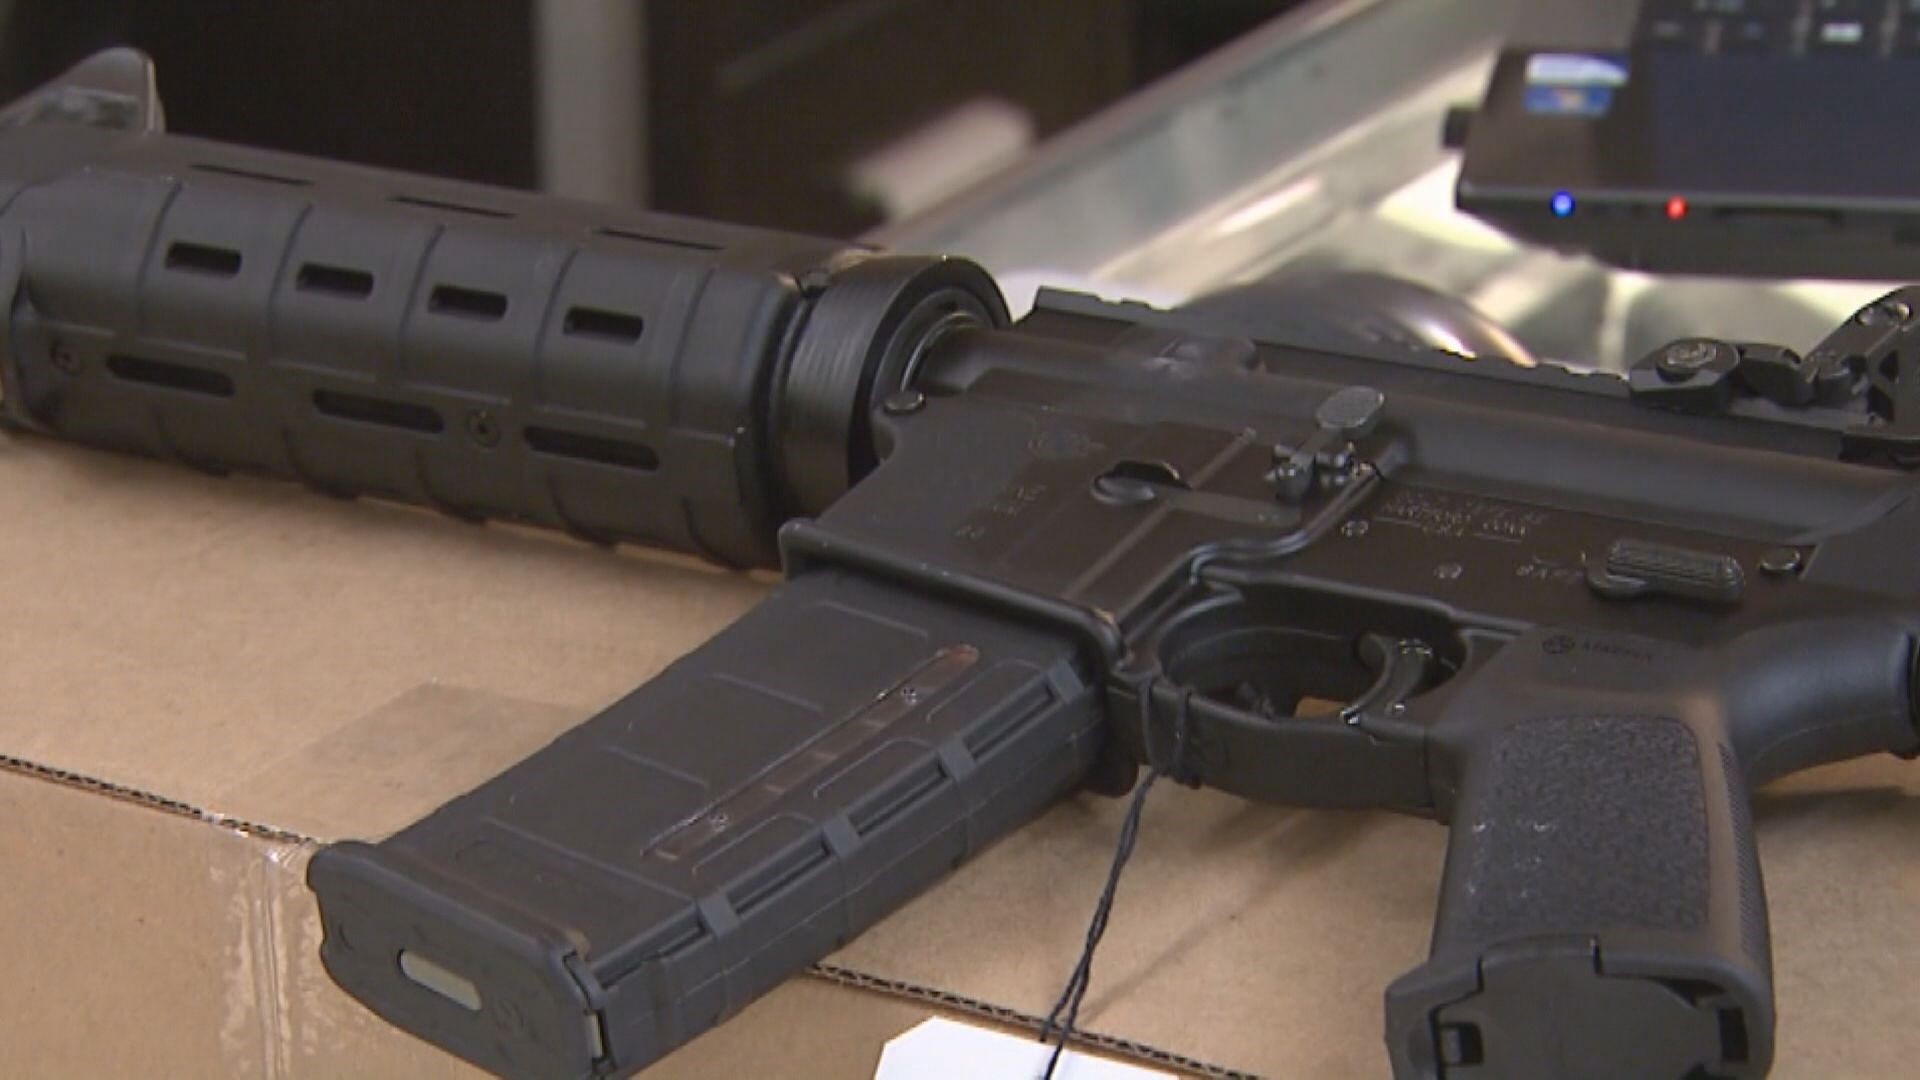 Newly introduced bills in Lansing would ban future sales and ownership of semiautomatic rifles and the open carry of them in Michigan.